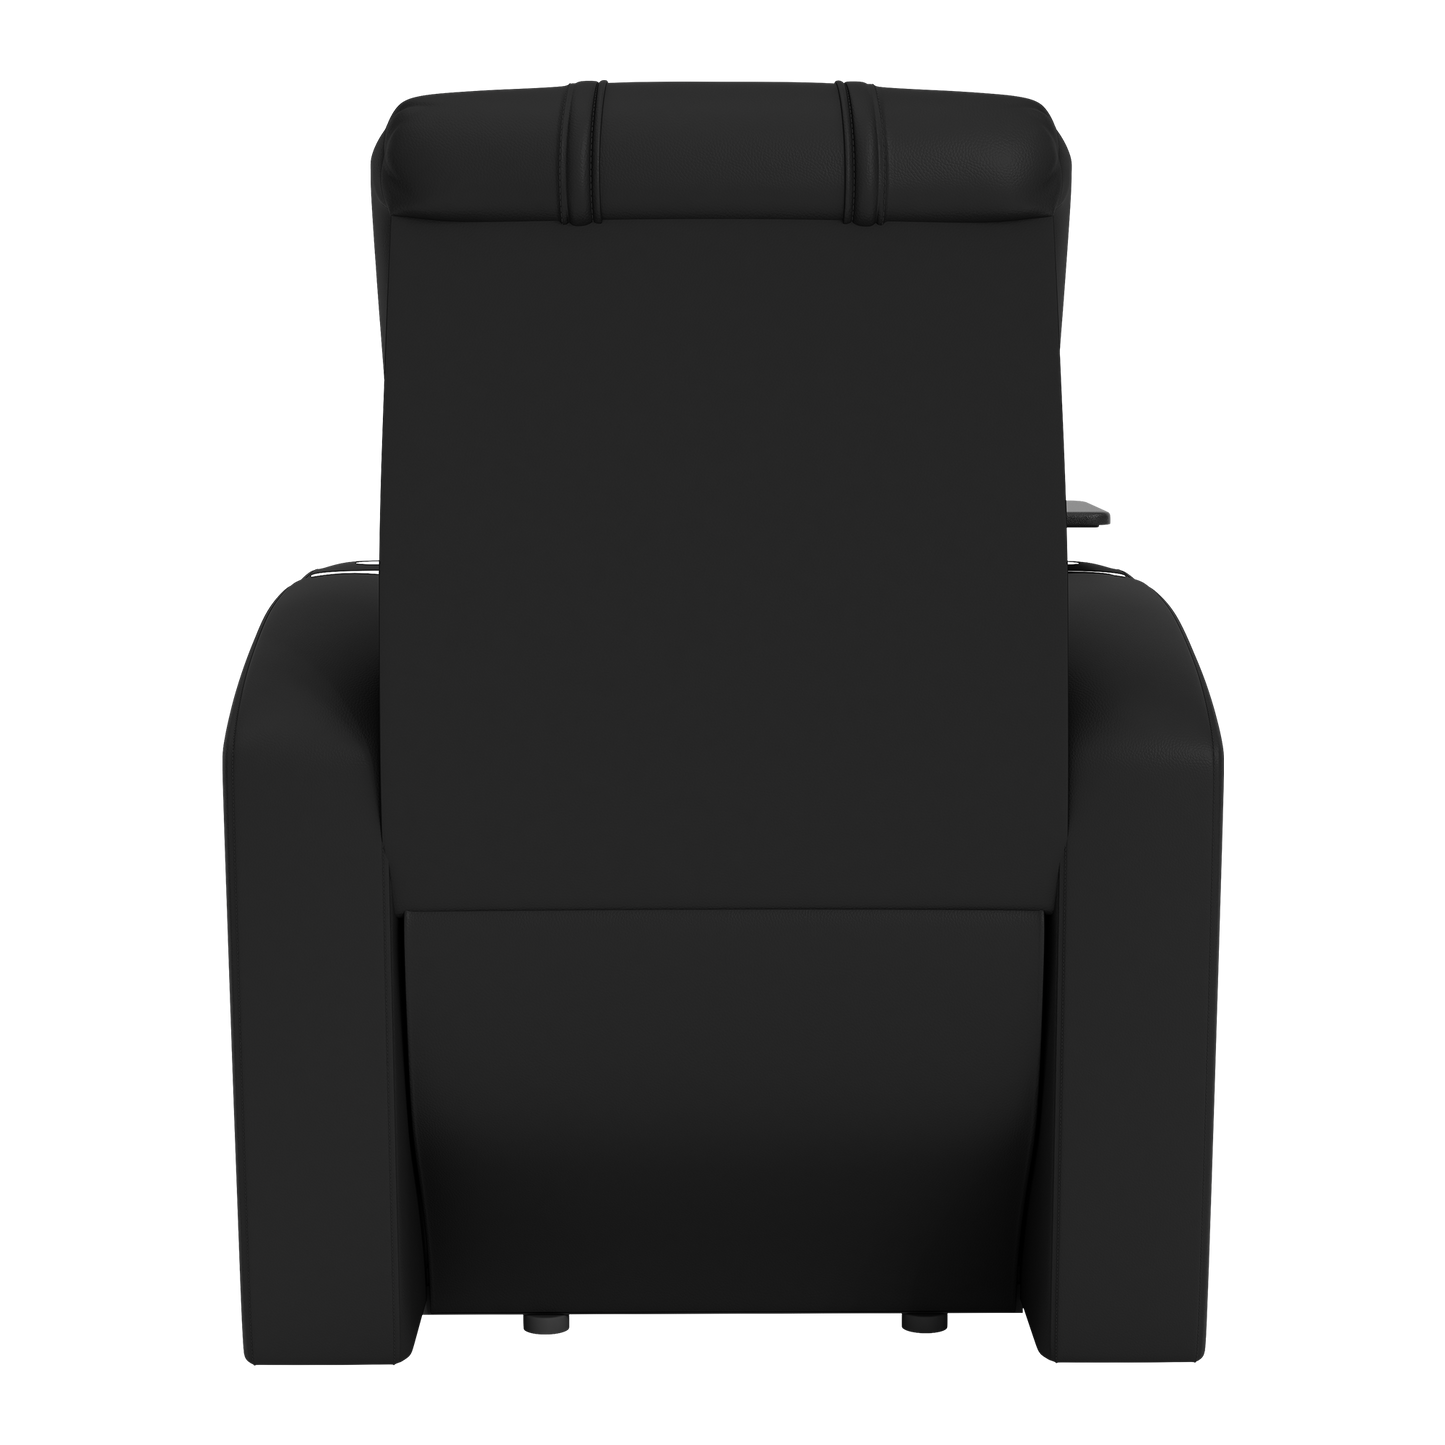 Stealth Power Plus Recliner with Memphis Grizzlies Secondary Logo